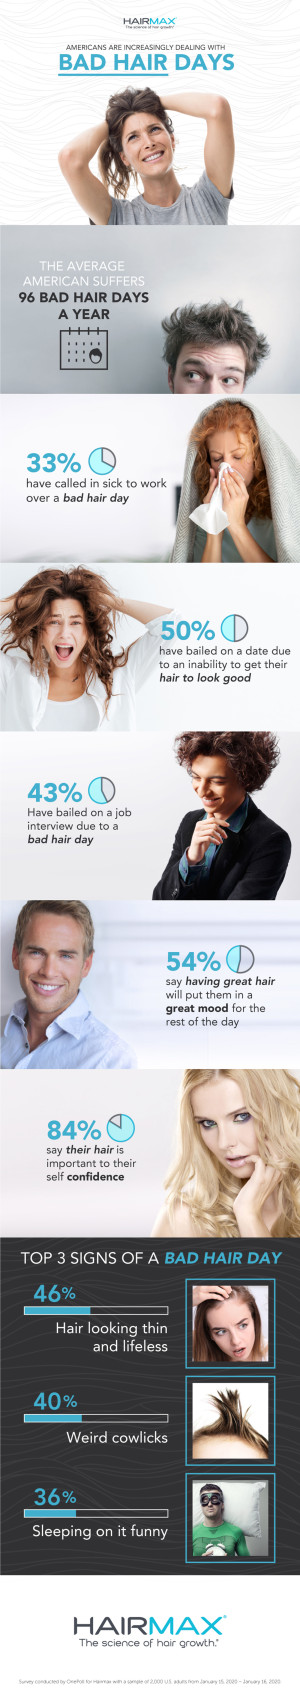 Bad Hair Day infographic